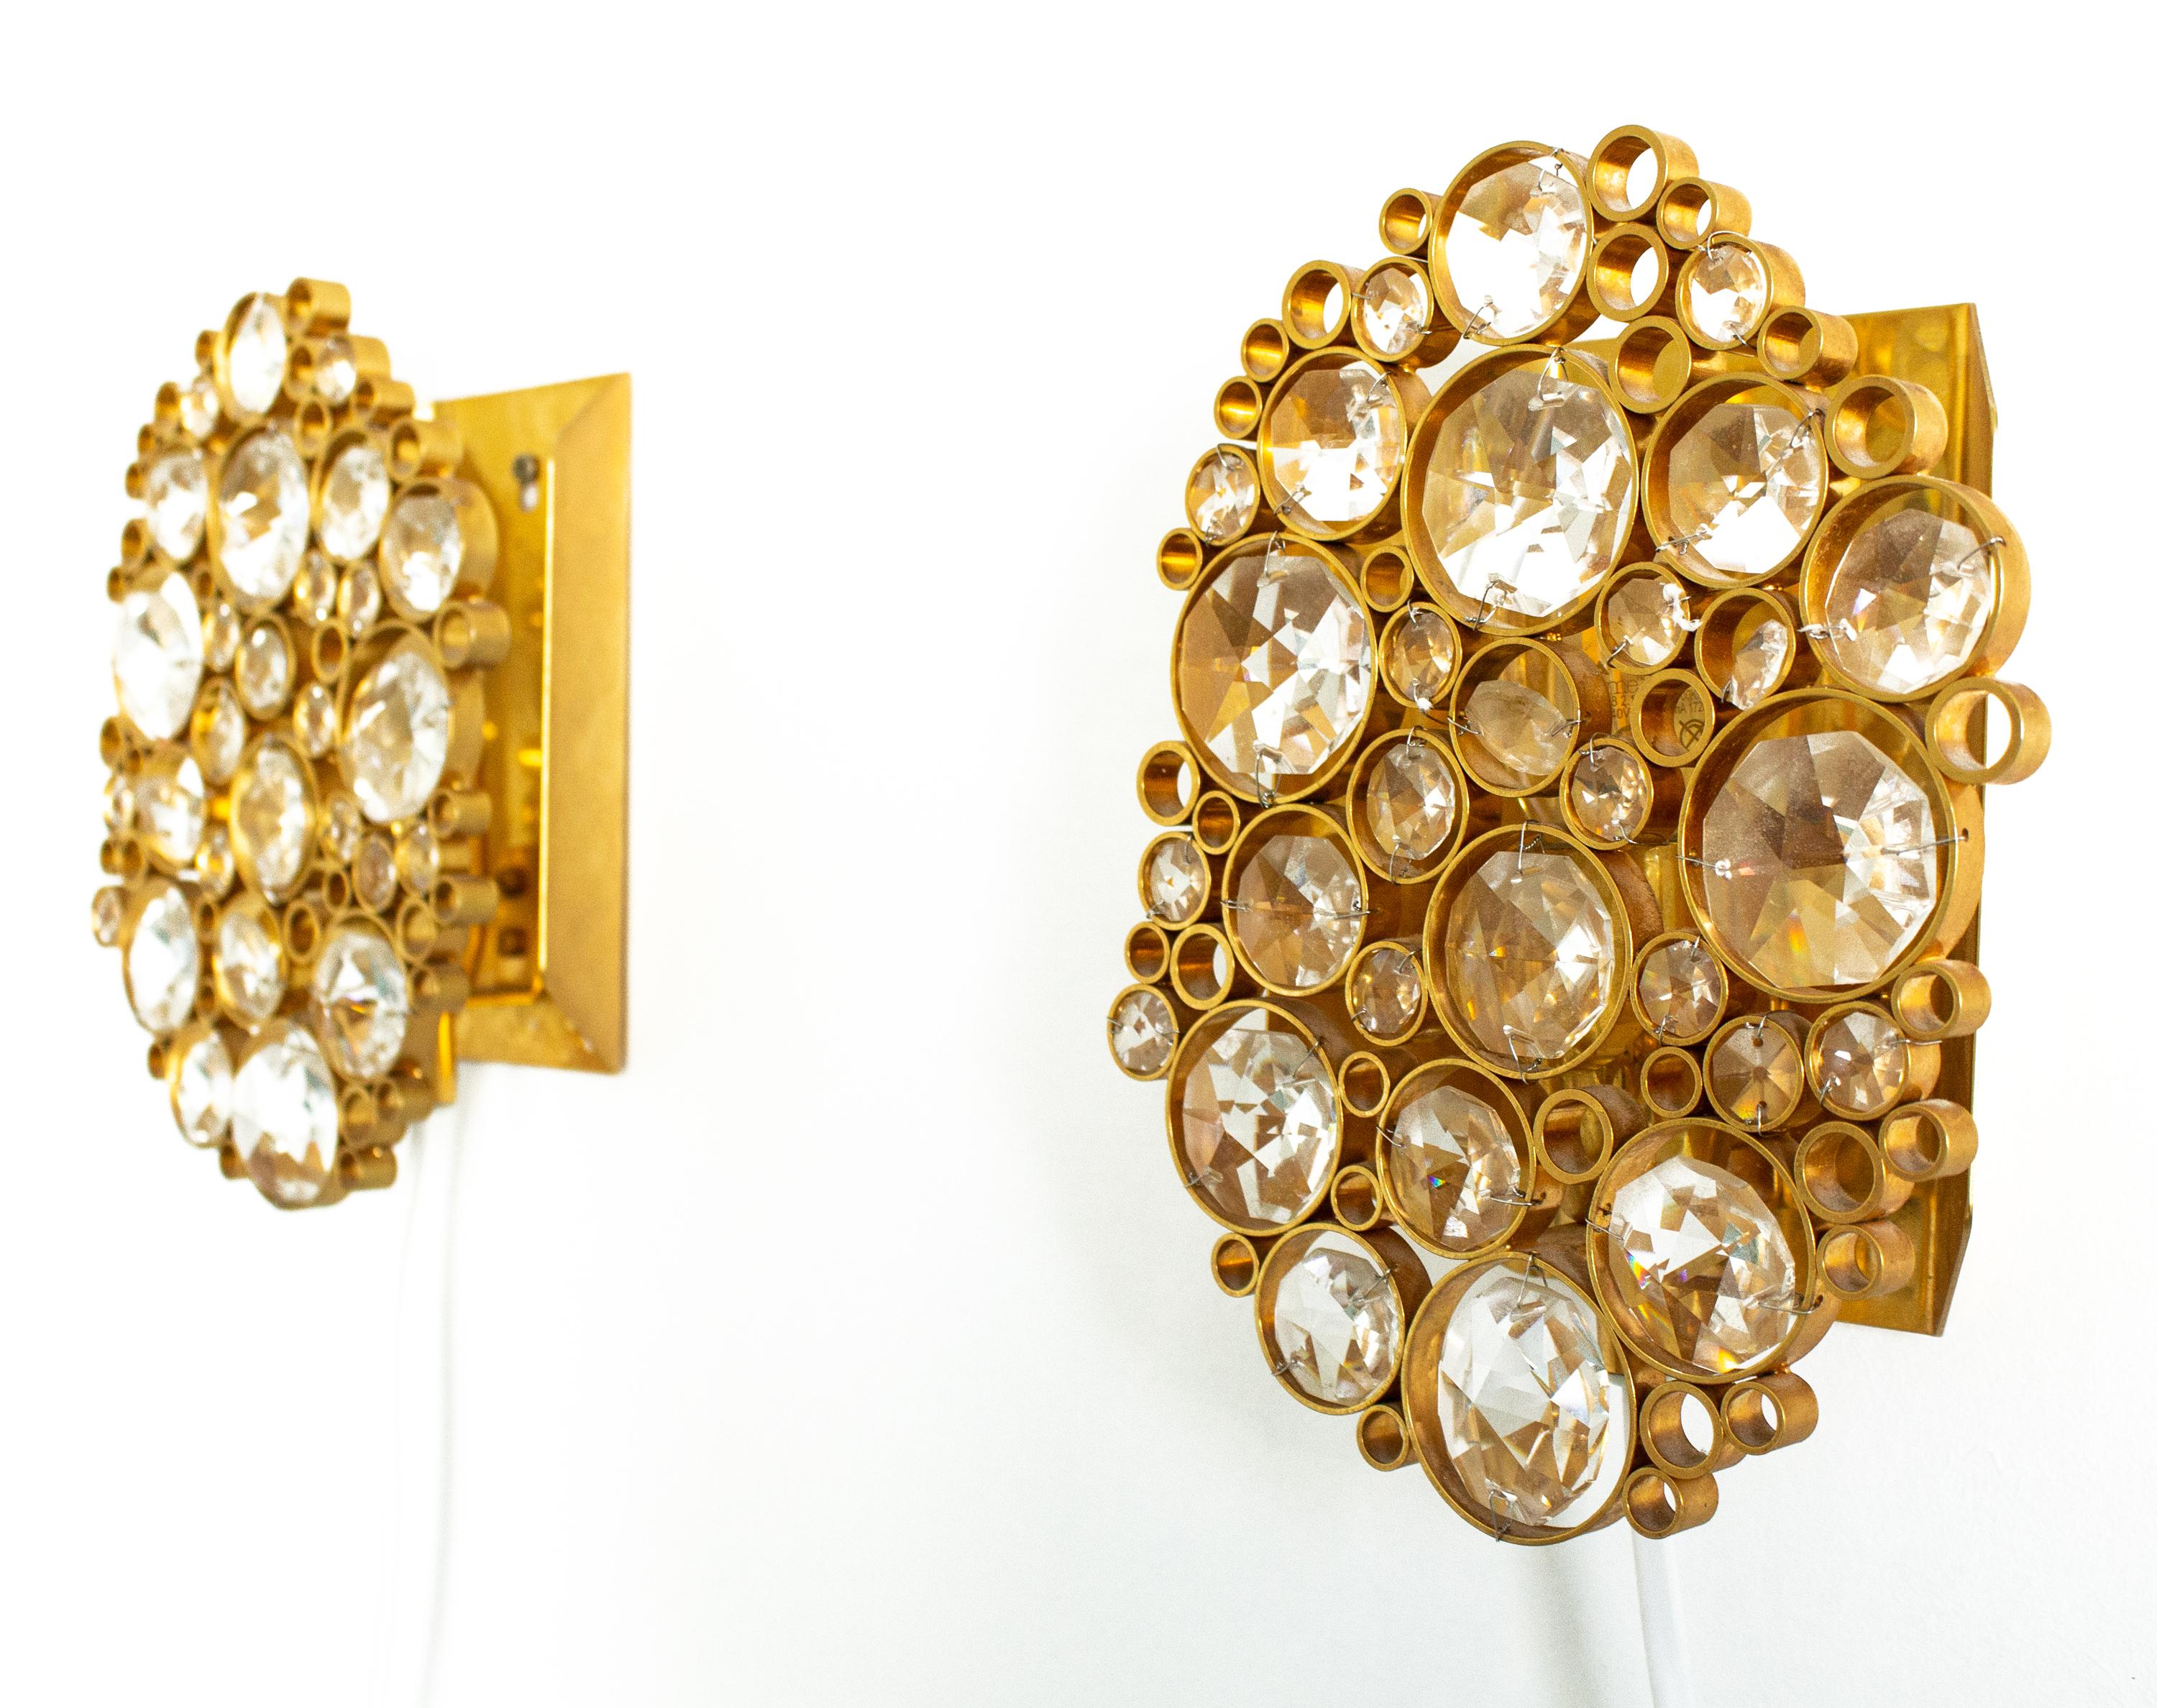 German Pair of Modernist Crystal Wall Scones by Palwa in Gilded Brass For Sale